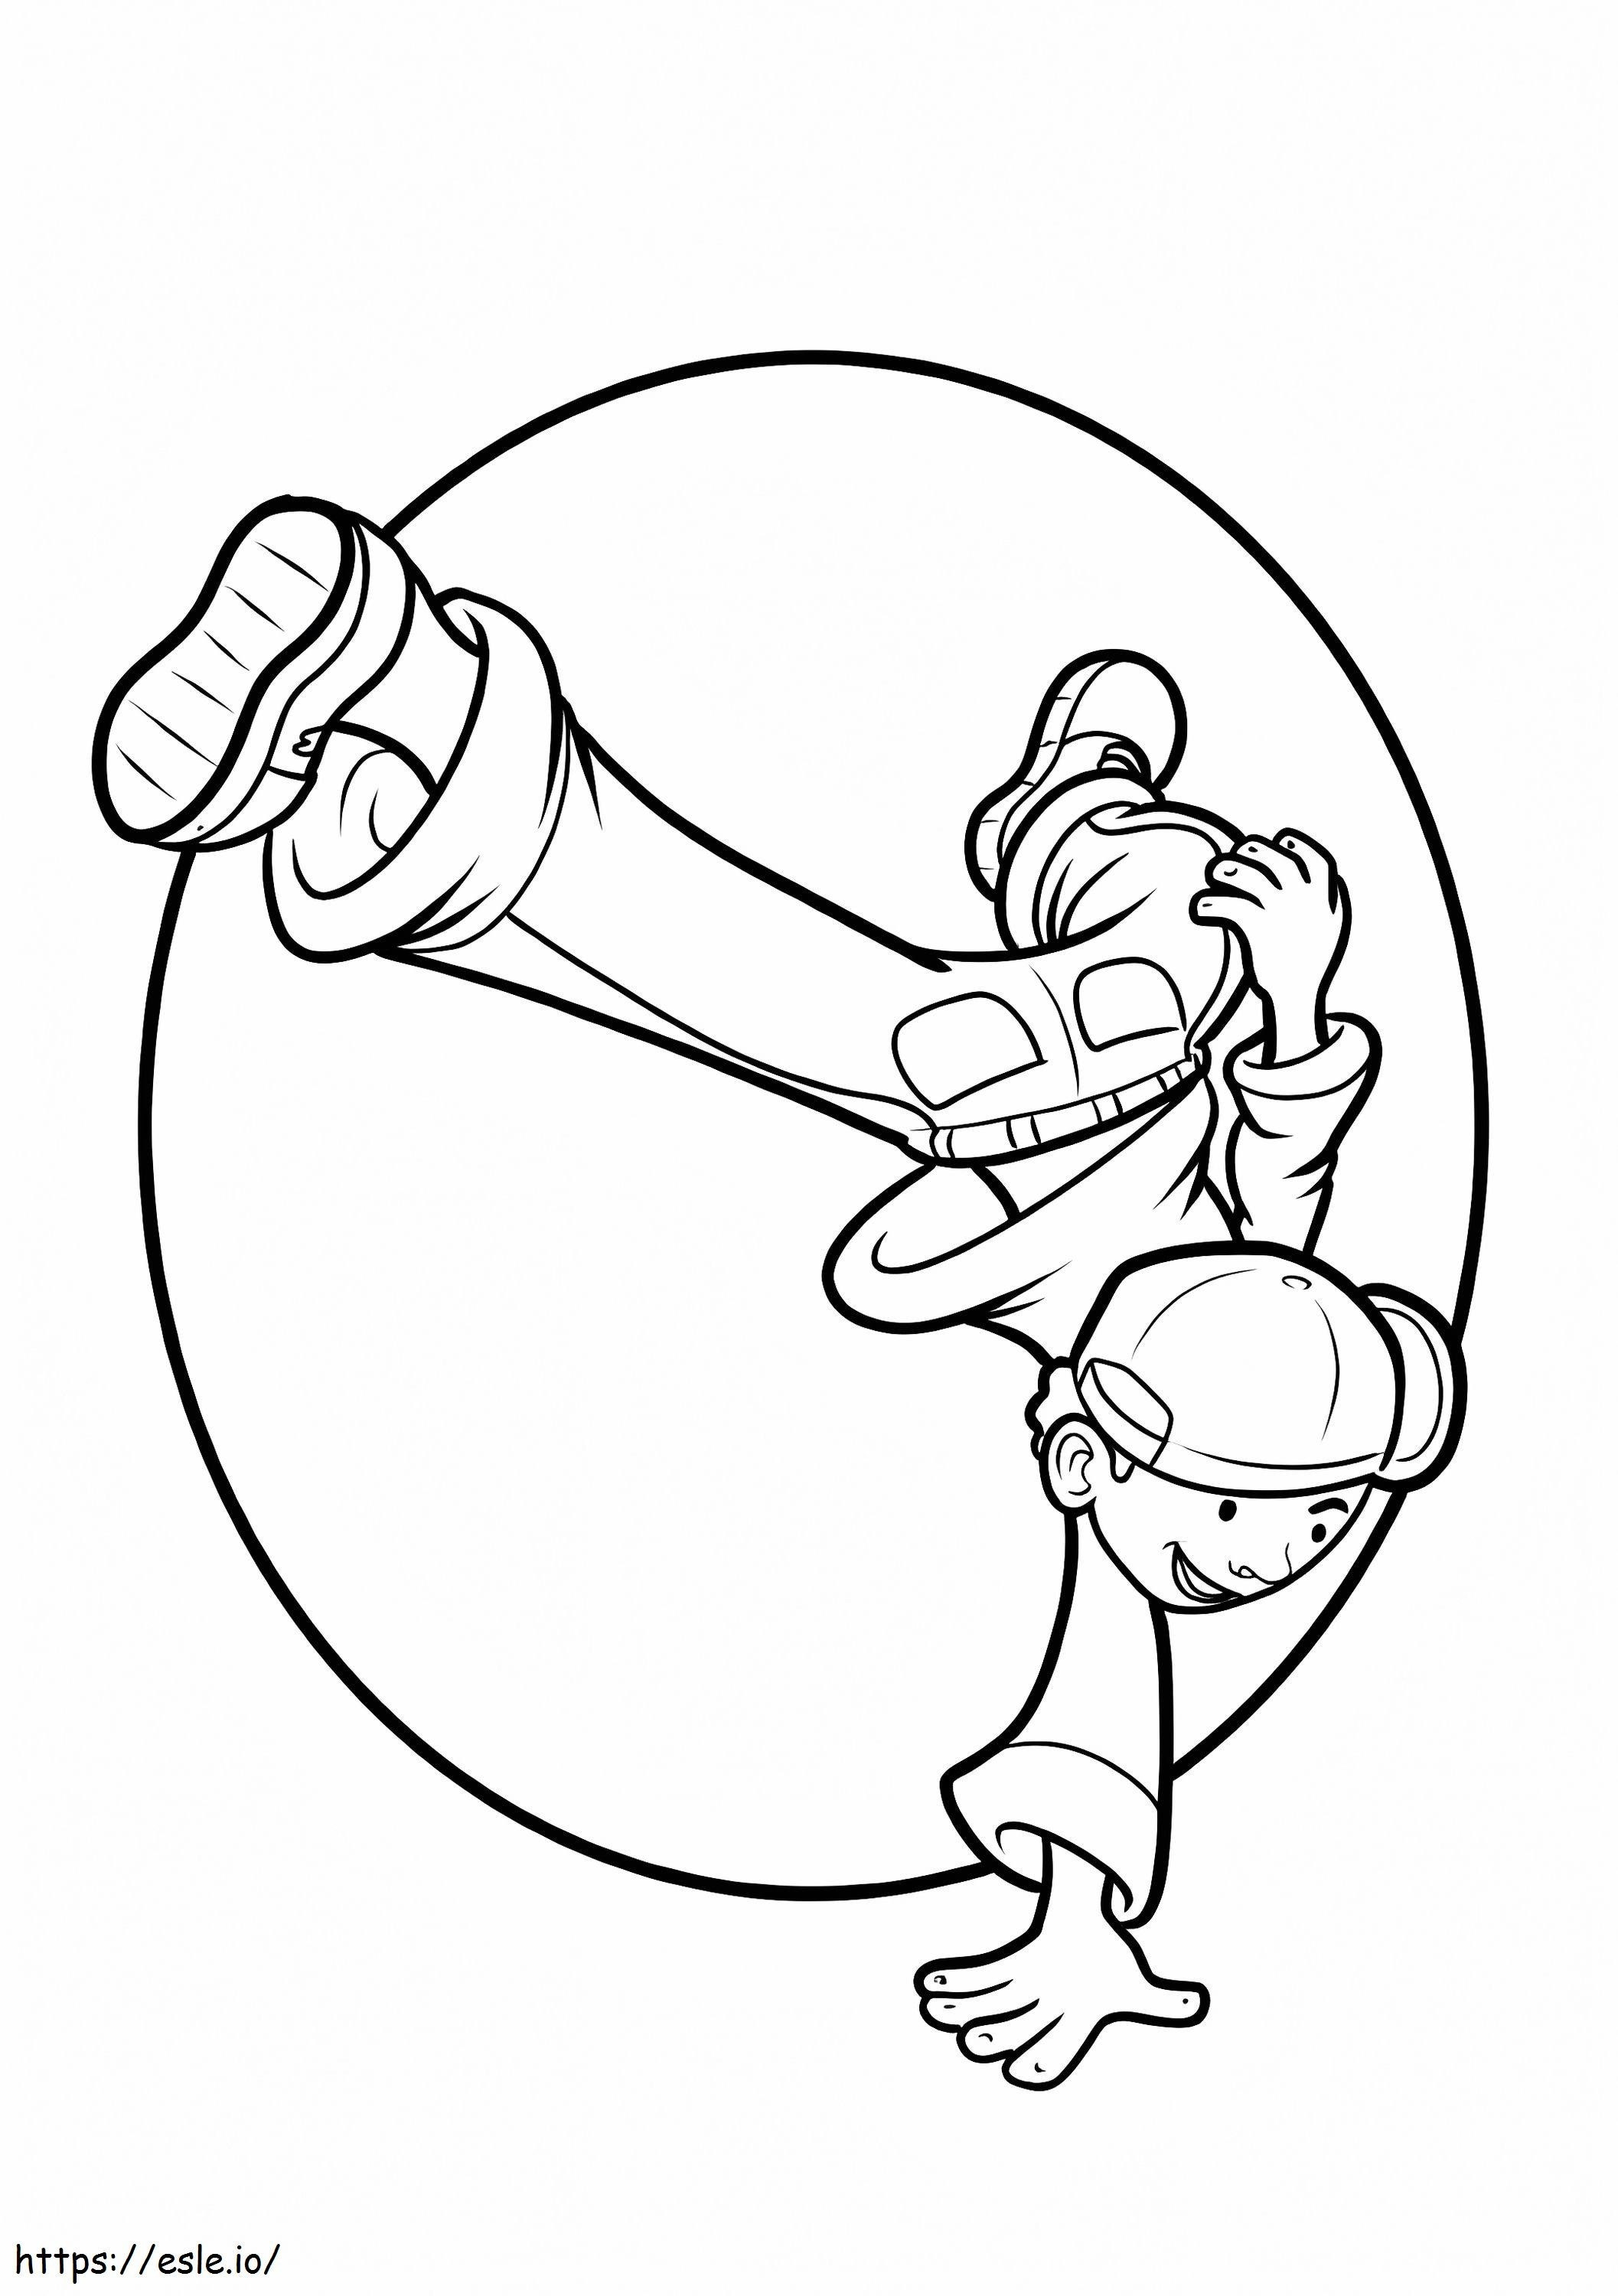 Dancer 3 coloring page